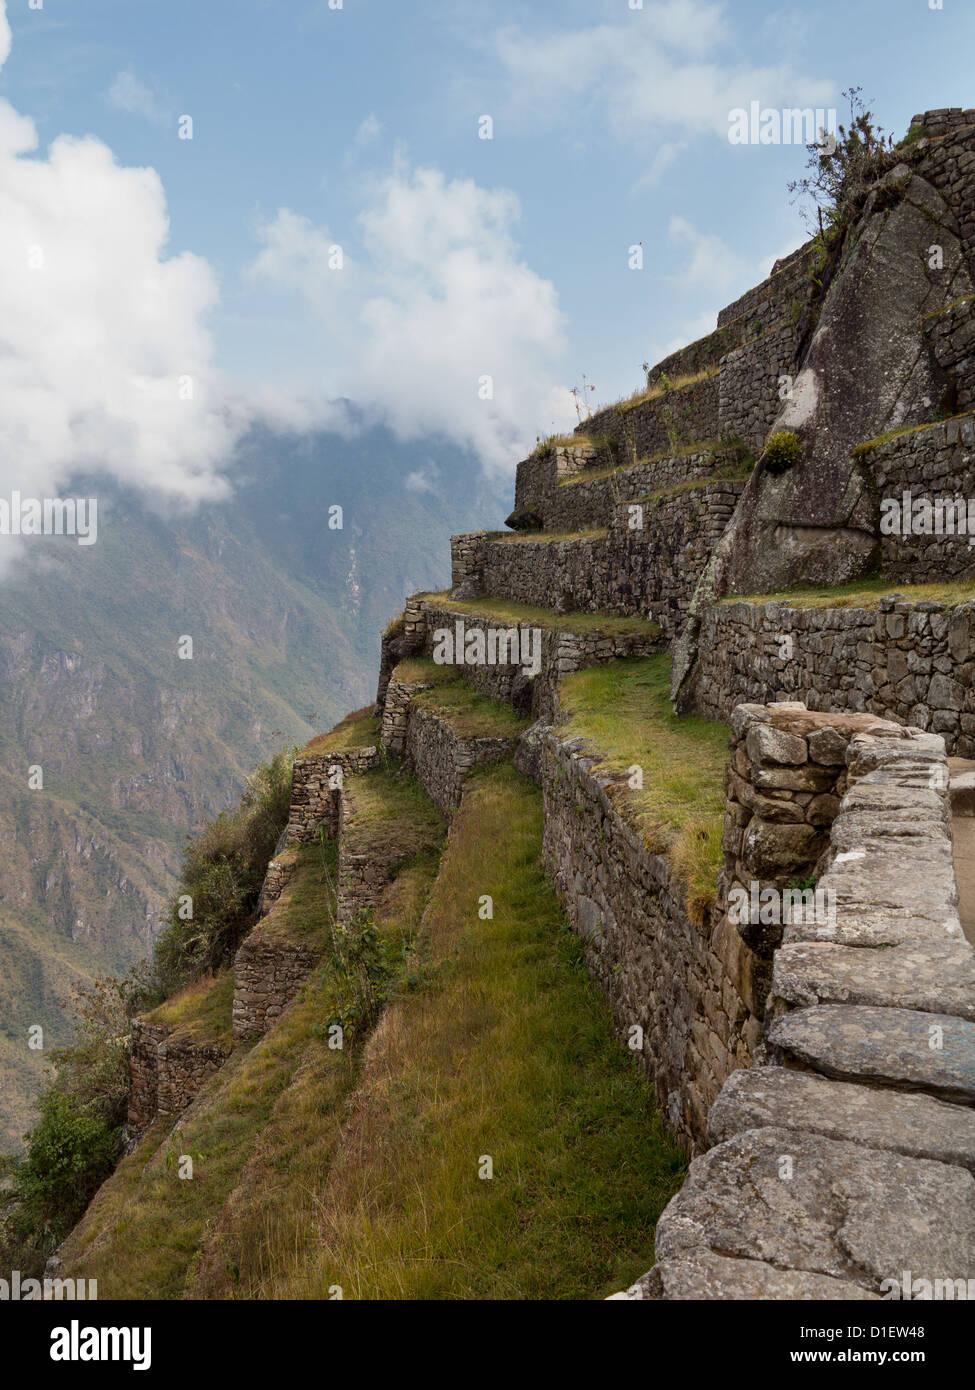 Morning views of terraces at Machu Picchu as mist clears from the mountainside ruins Stock Photo